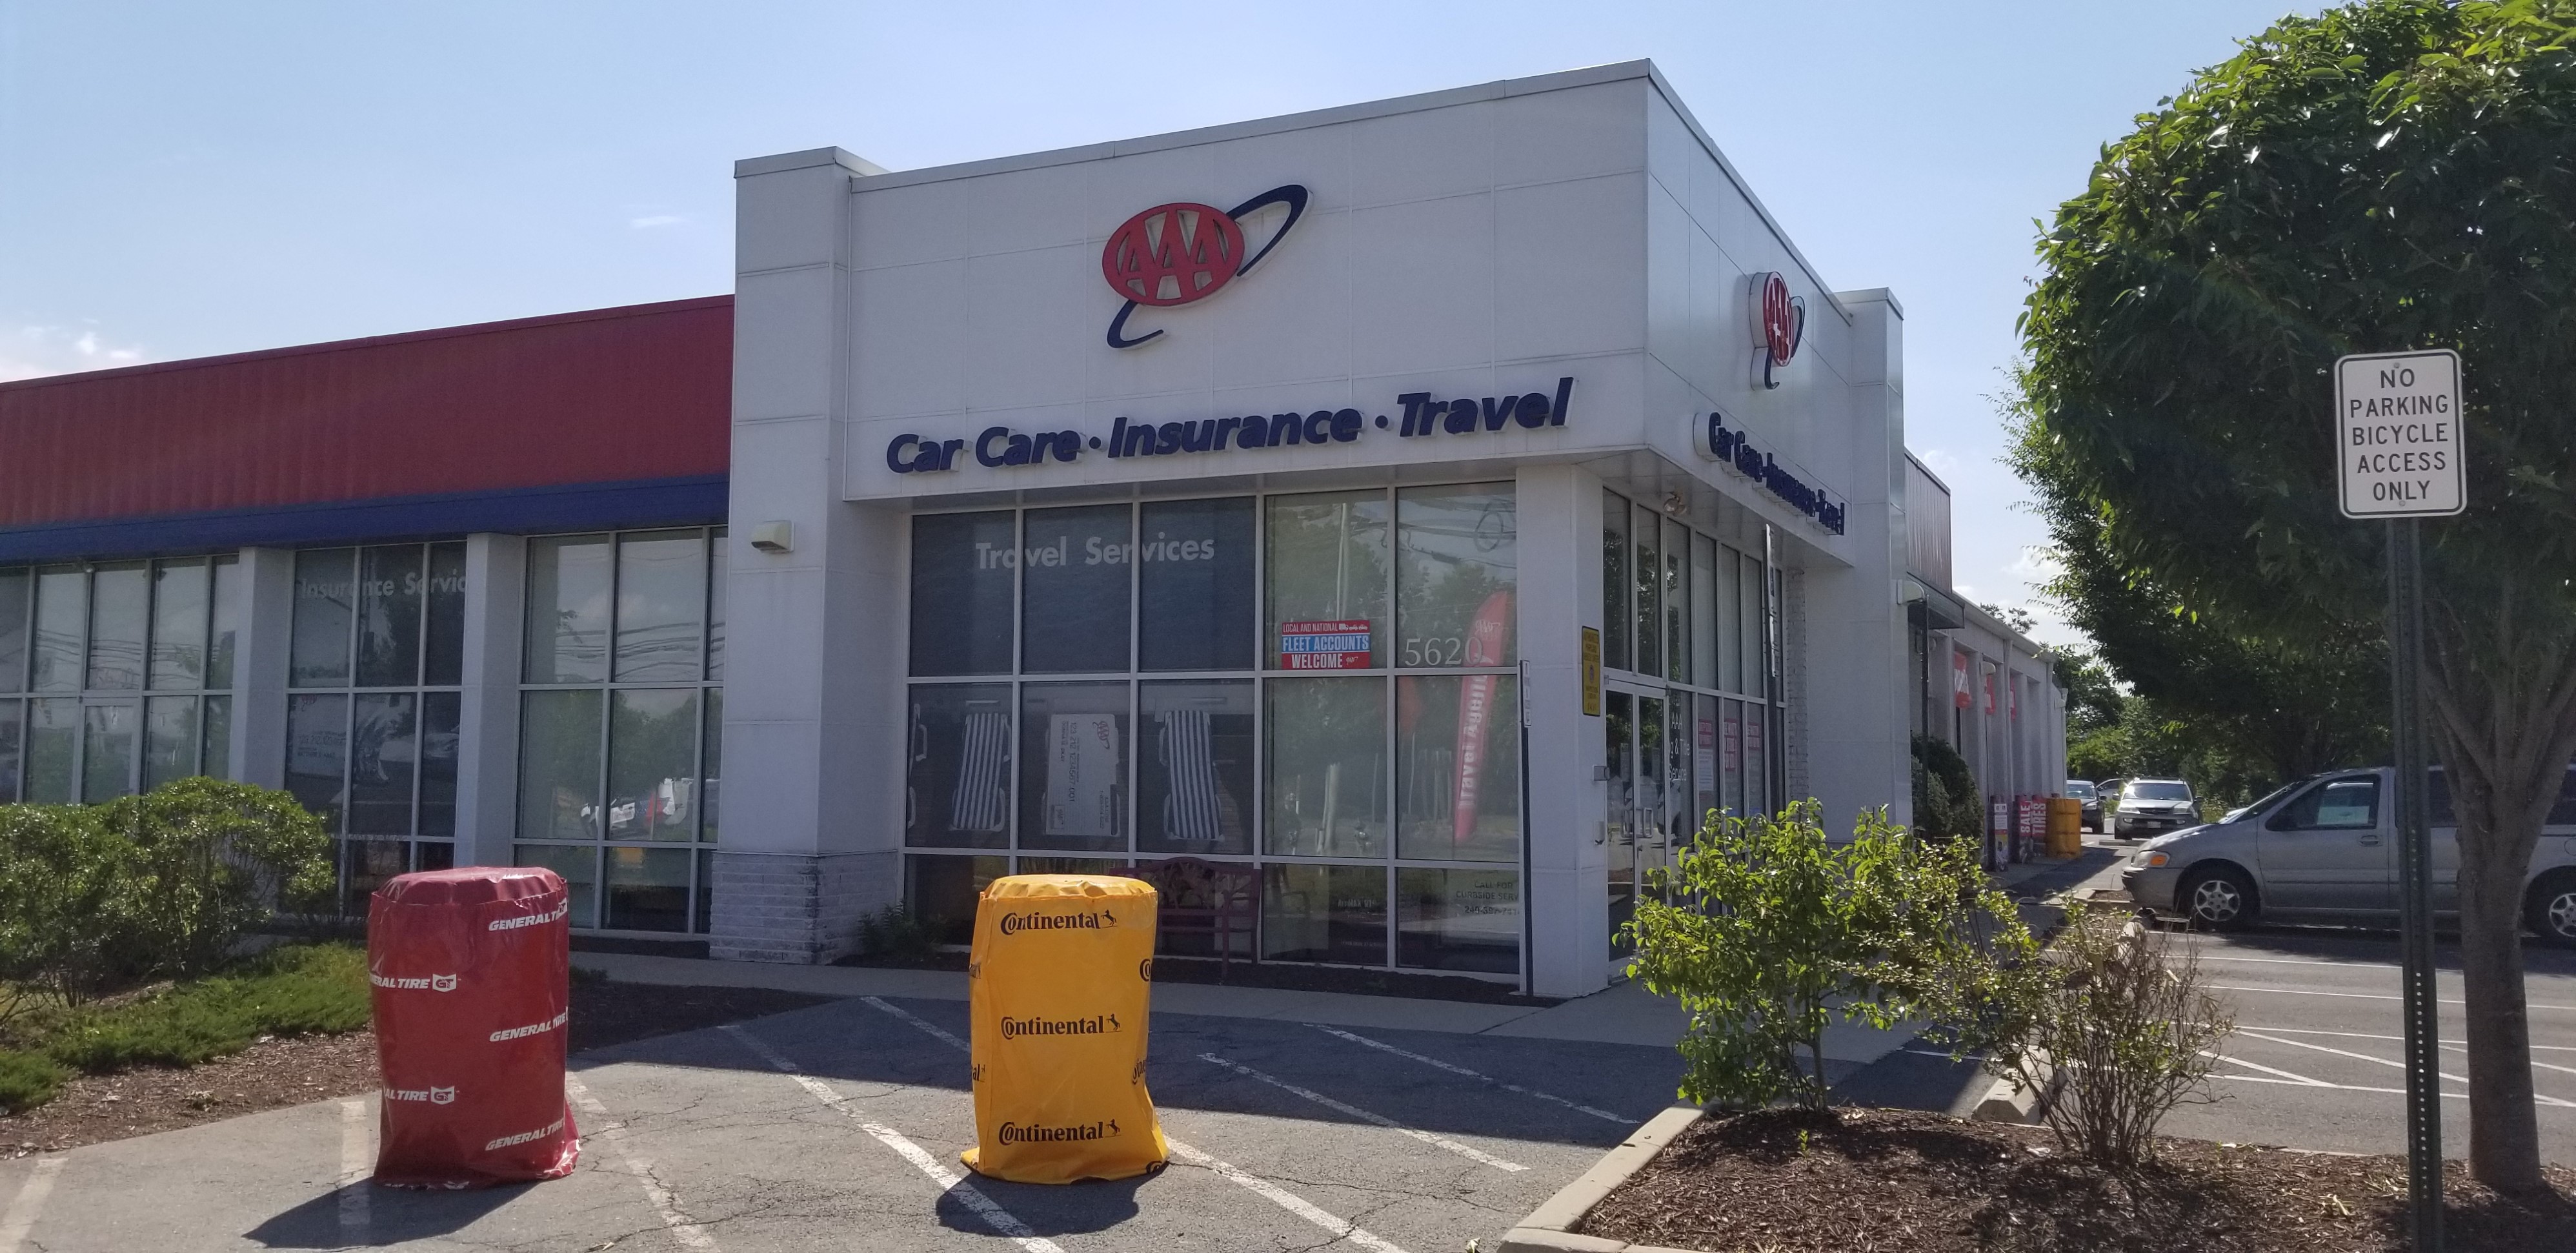 Image 2 | AAA Frederick Car Care Insurance Travel Center